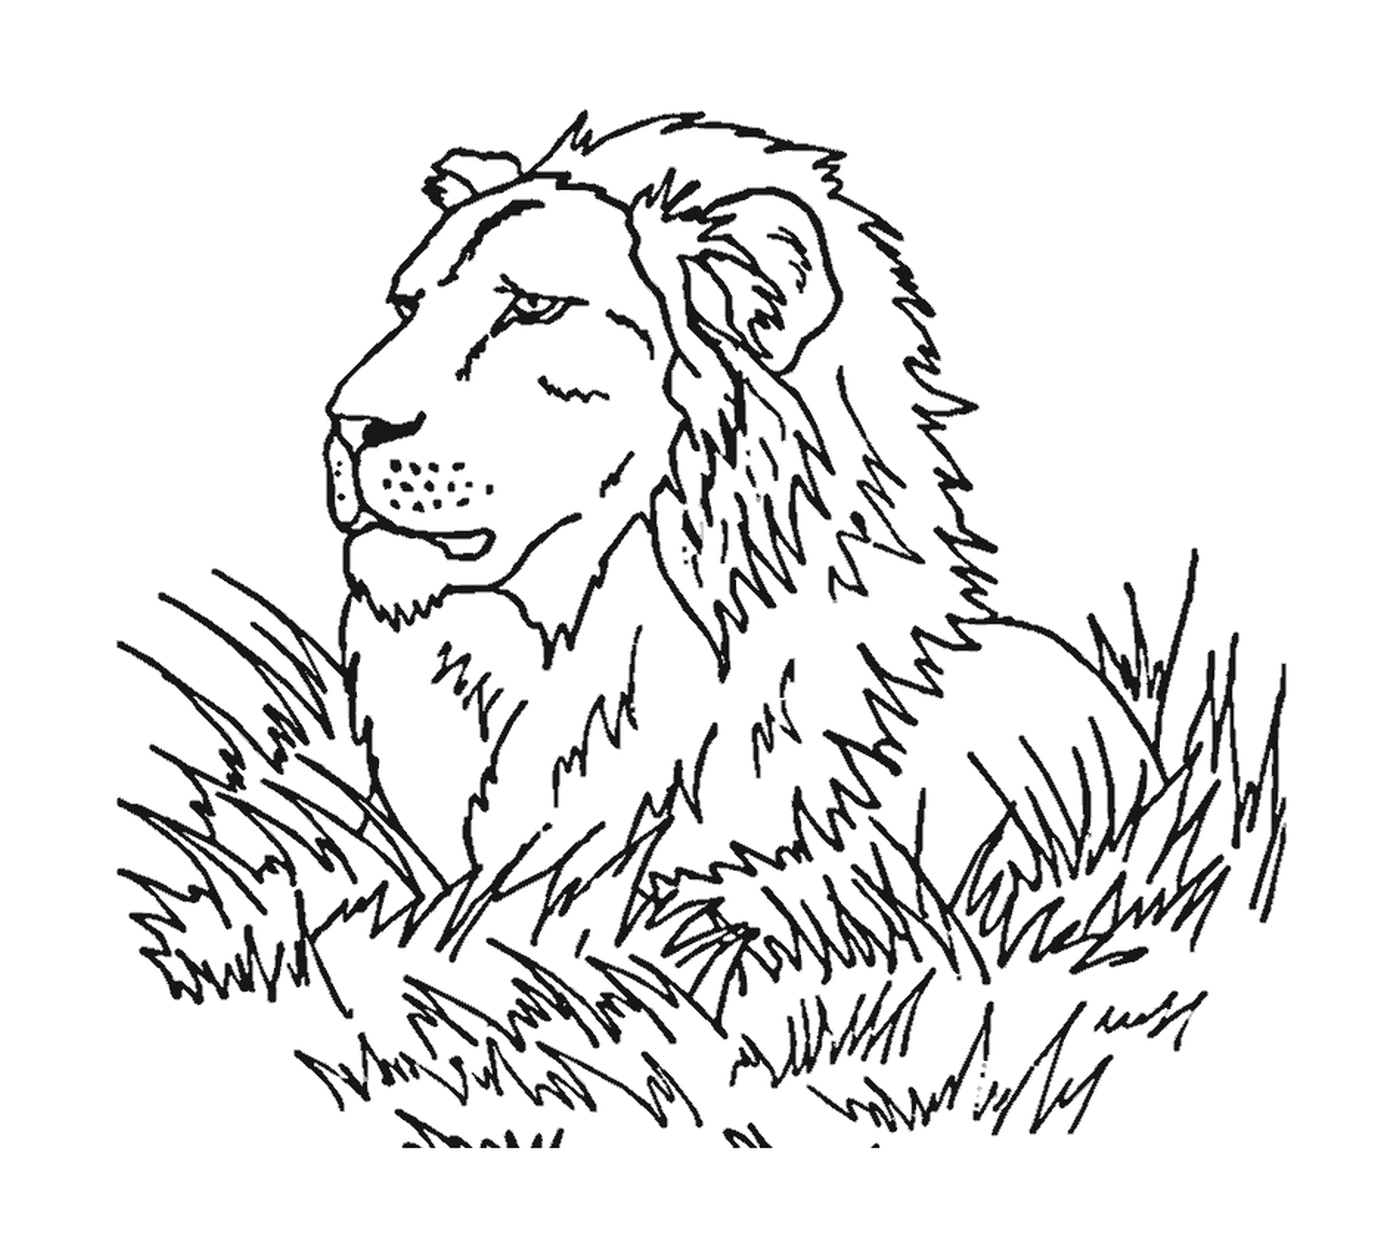  Lion in the savannah, majestic 